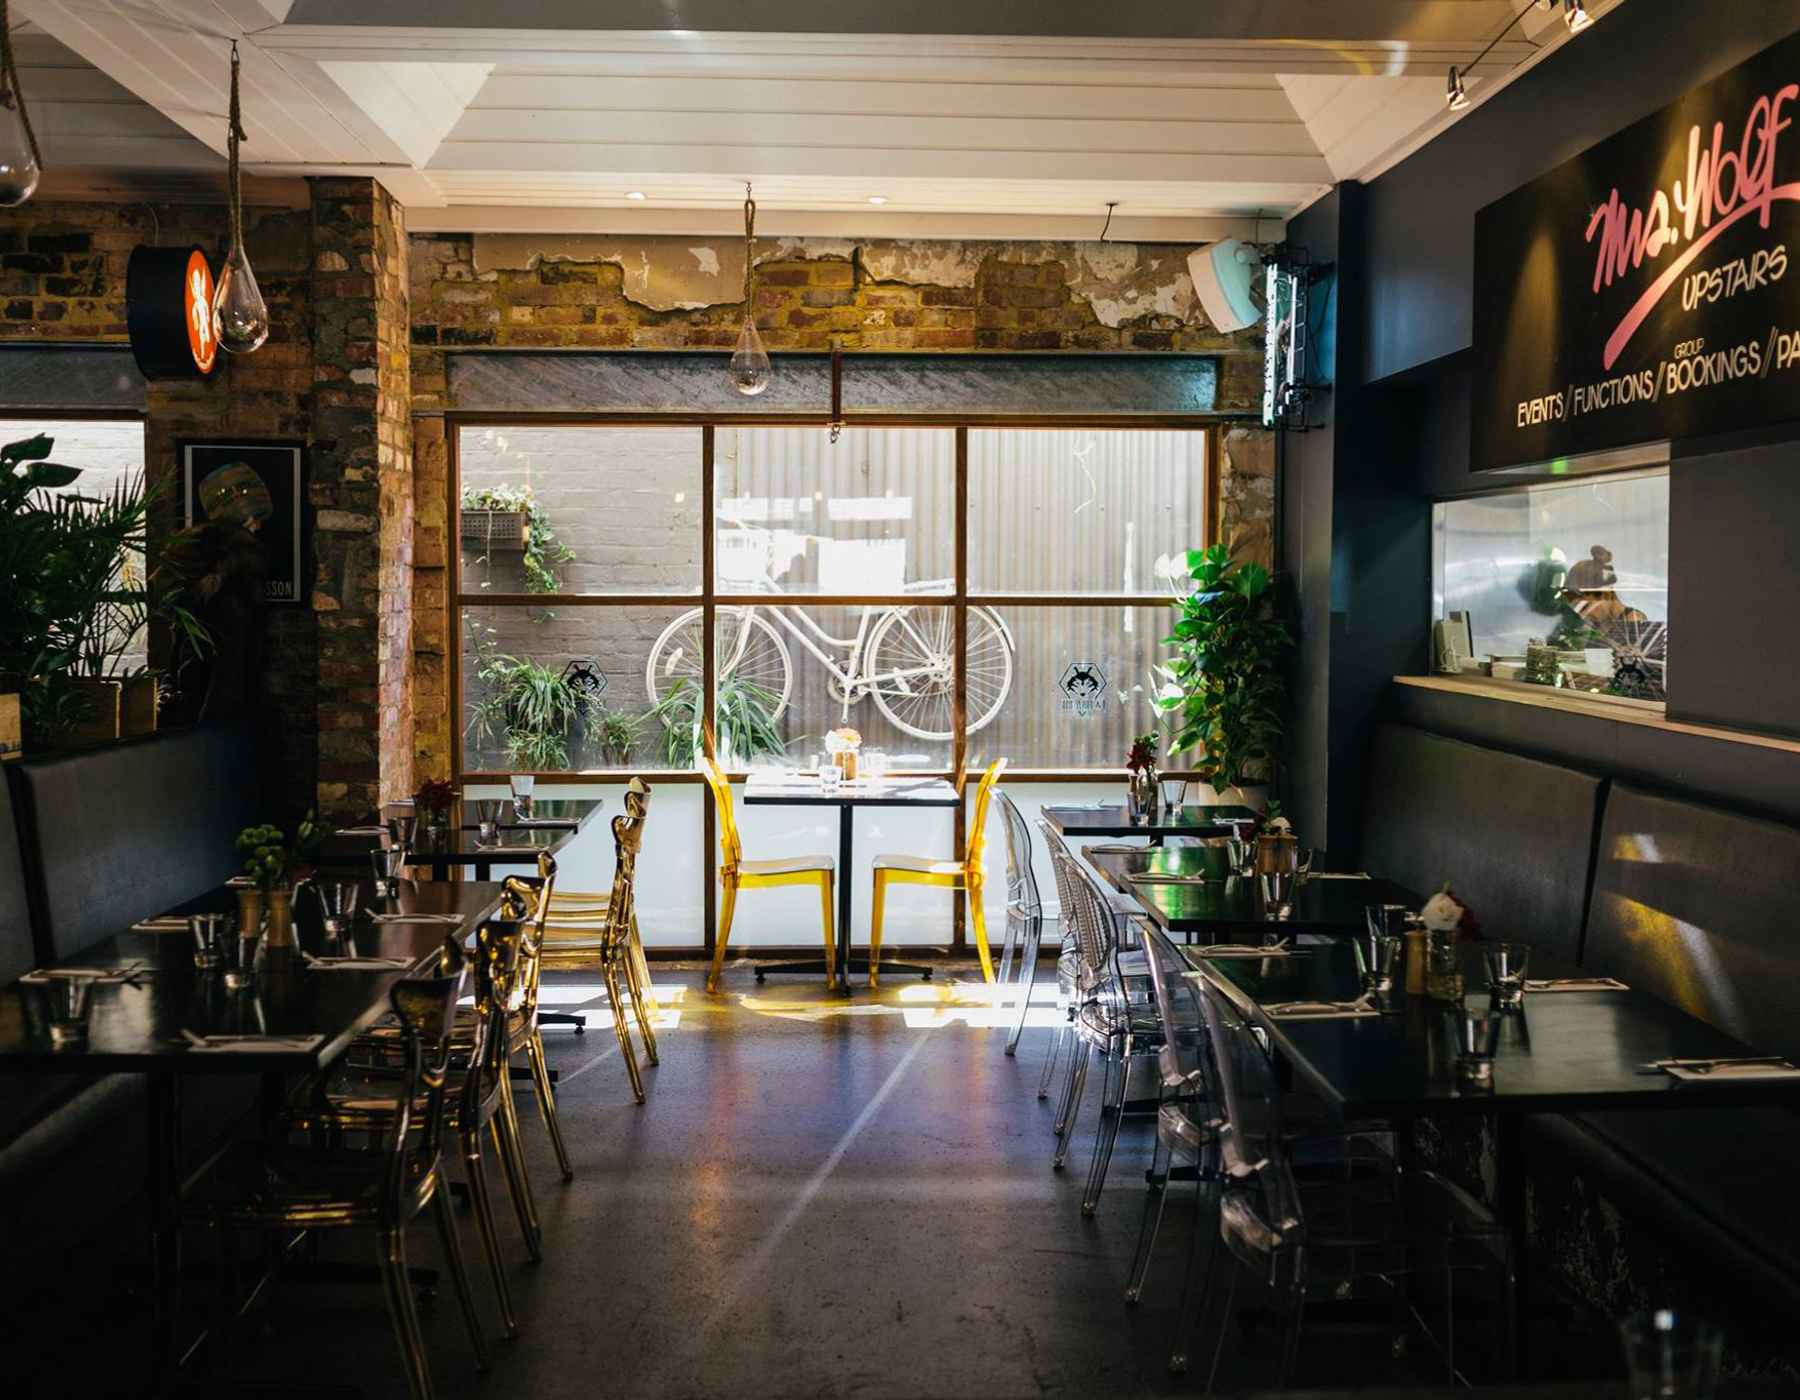 Our three favourite Melbourne eating must-dos